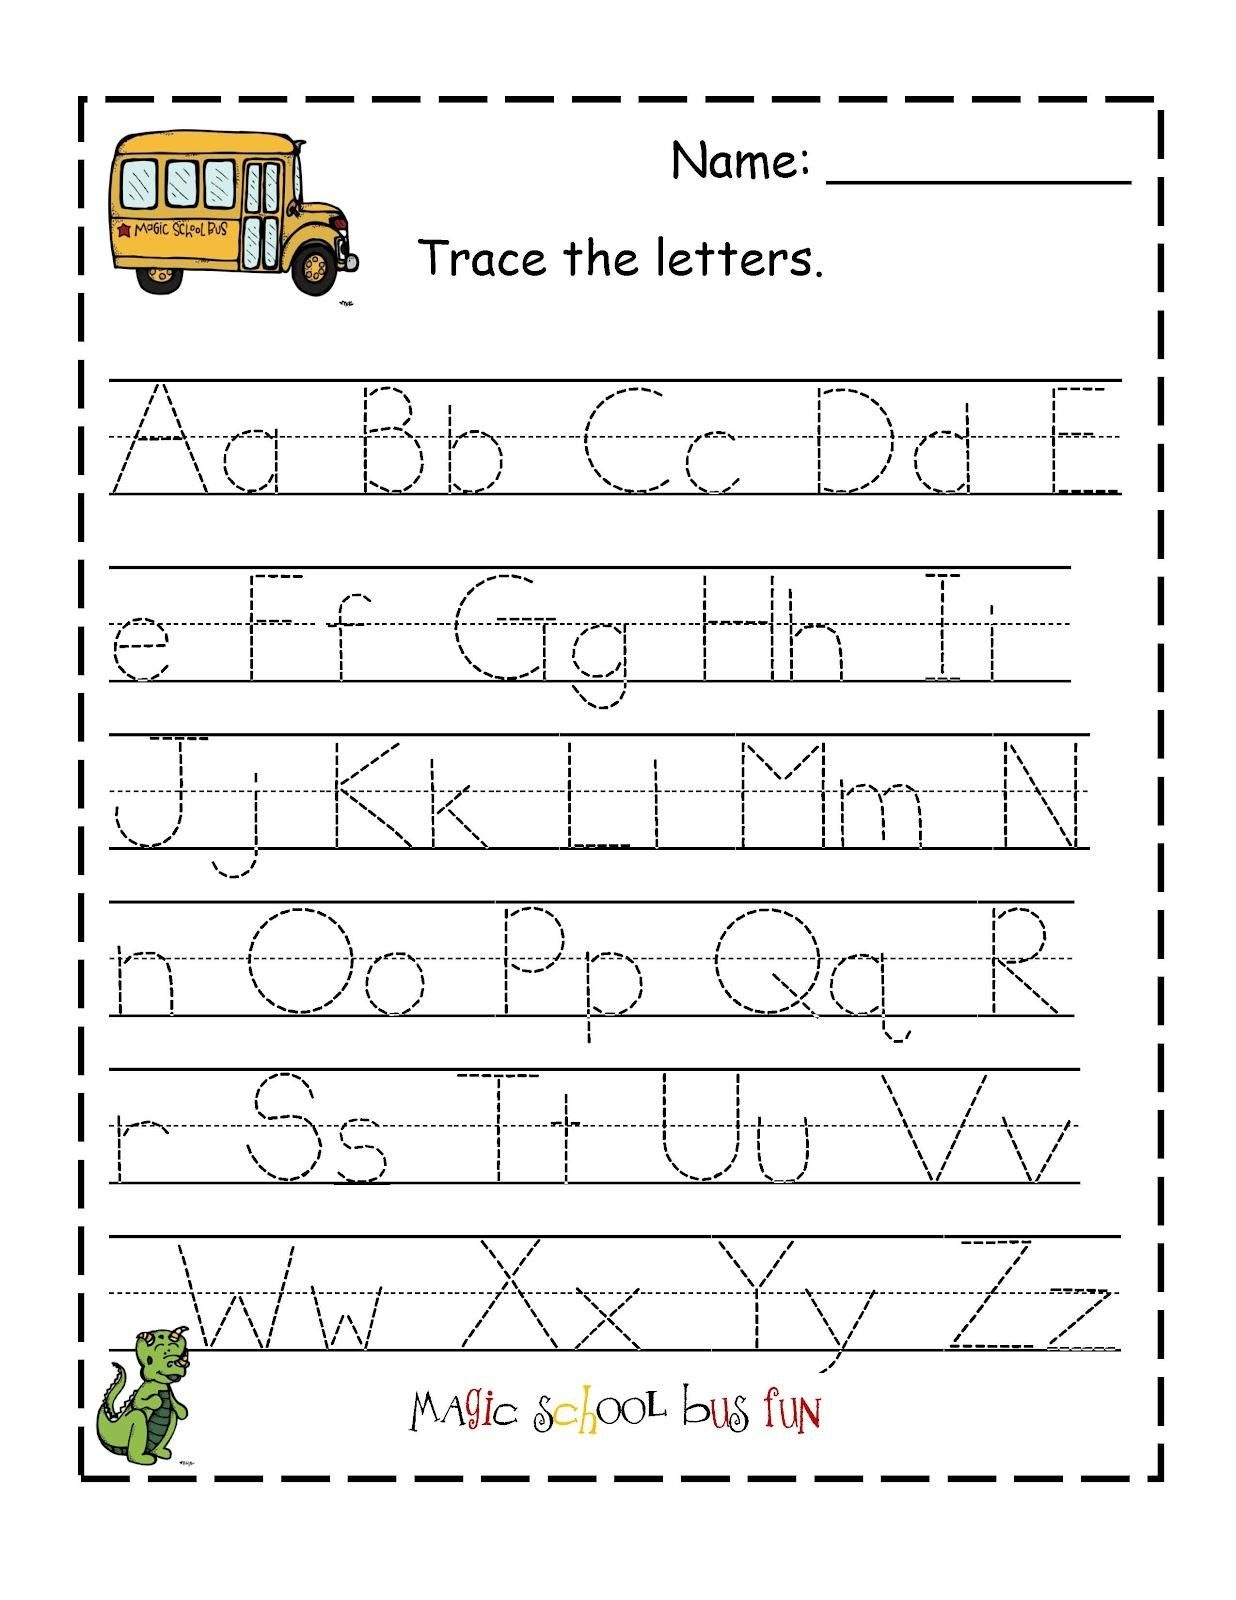 Free Printable Abc Tracing Worksheets #2 | Places To Visit - Free Printable Tracing Letters And Numbers Worksheets